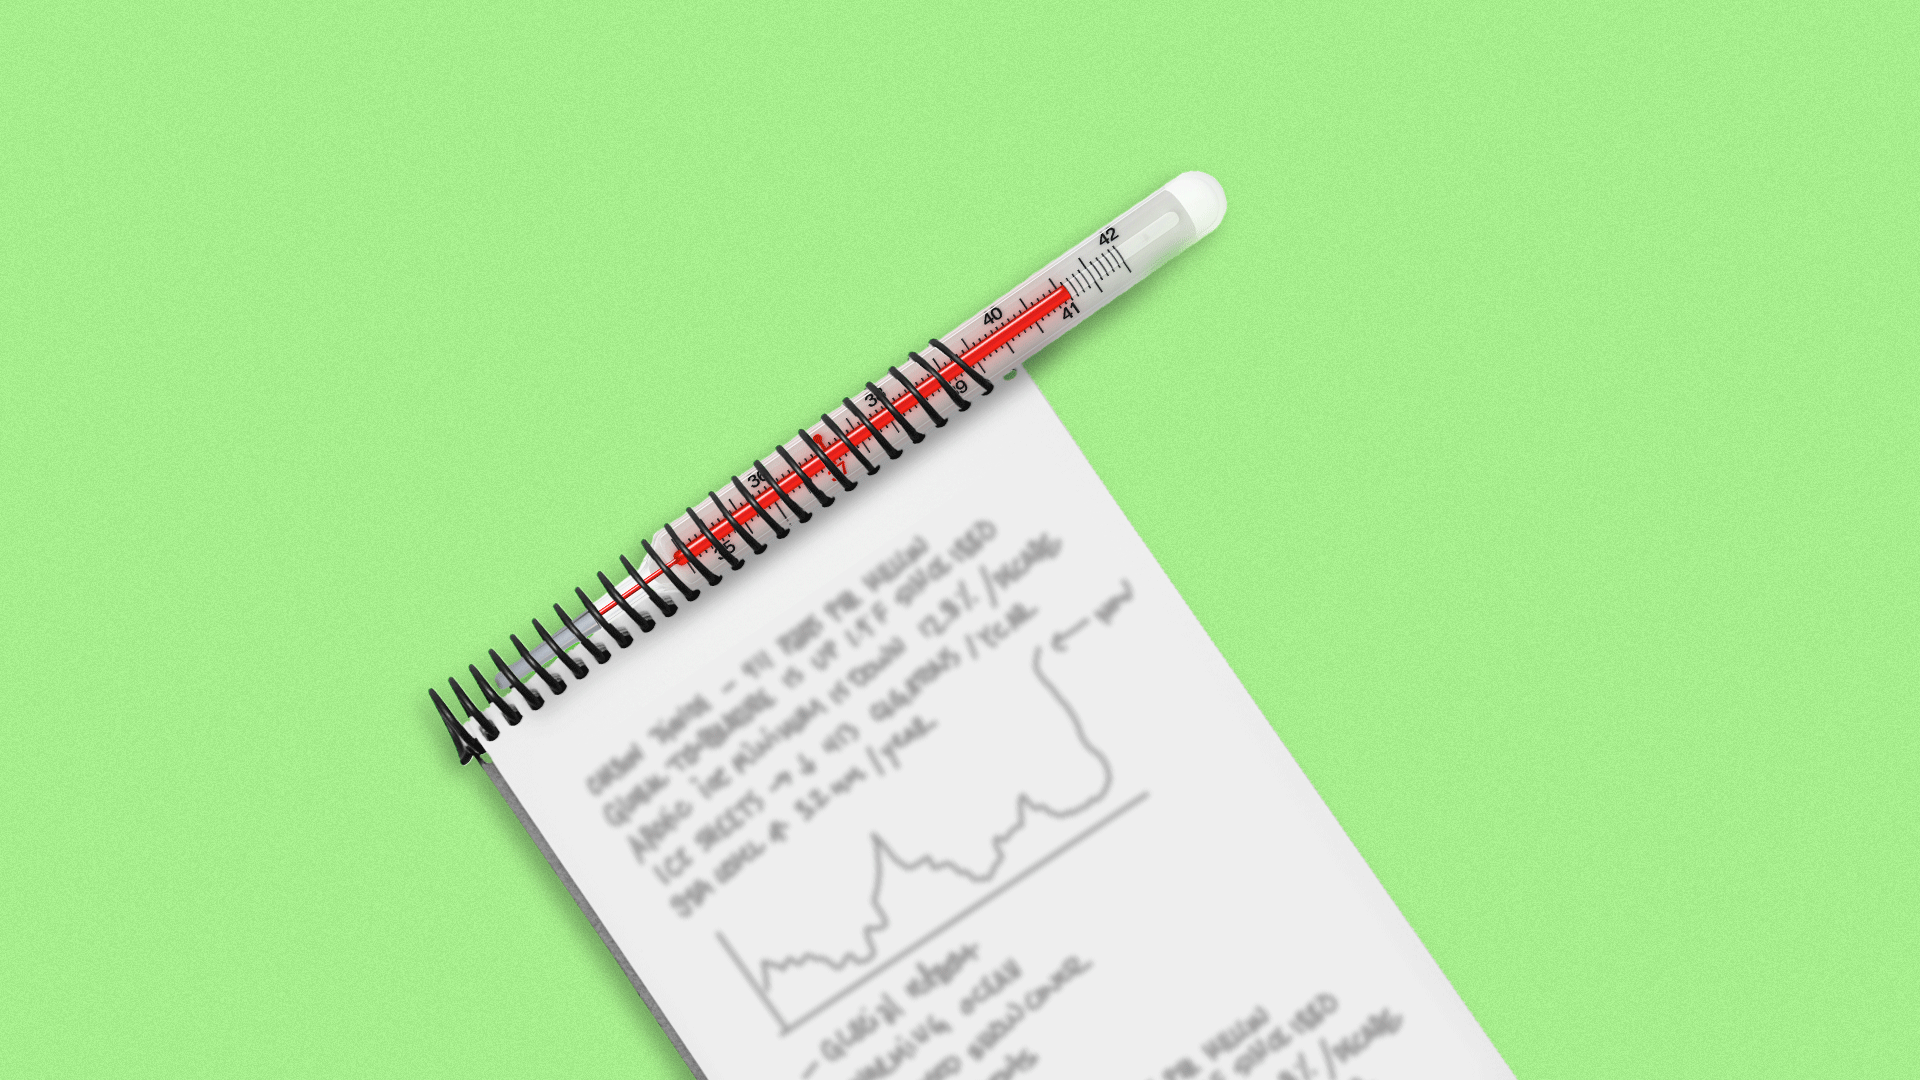 Illustration of a reporter's notebook with a thermometer in the spiral.